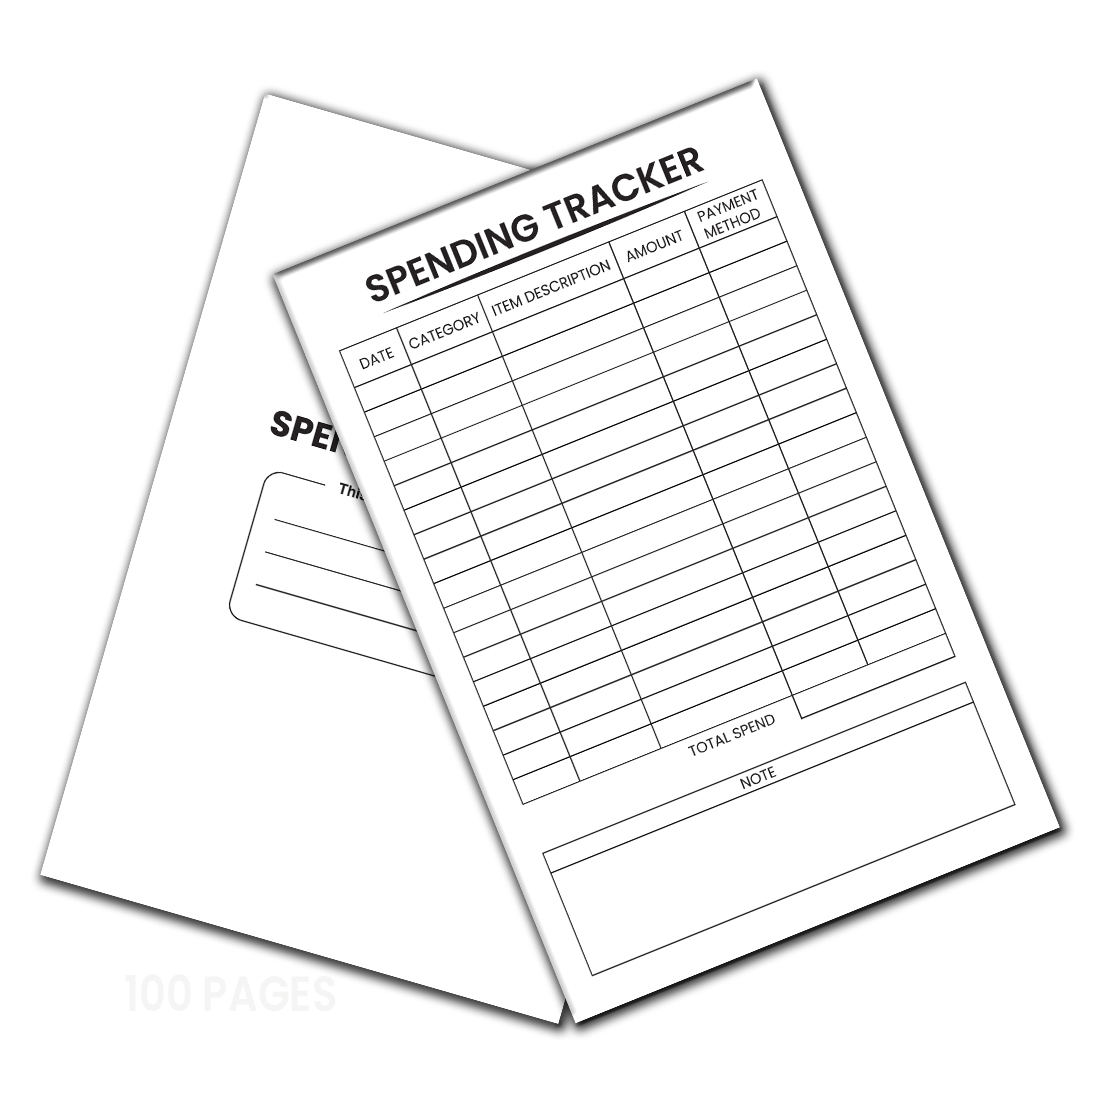 Image with blank colorful pages and cover of spending tracker.